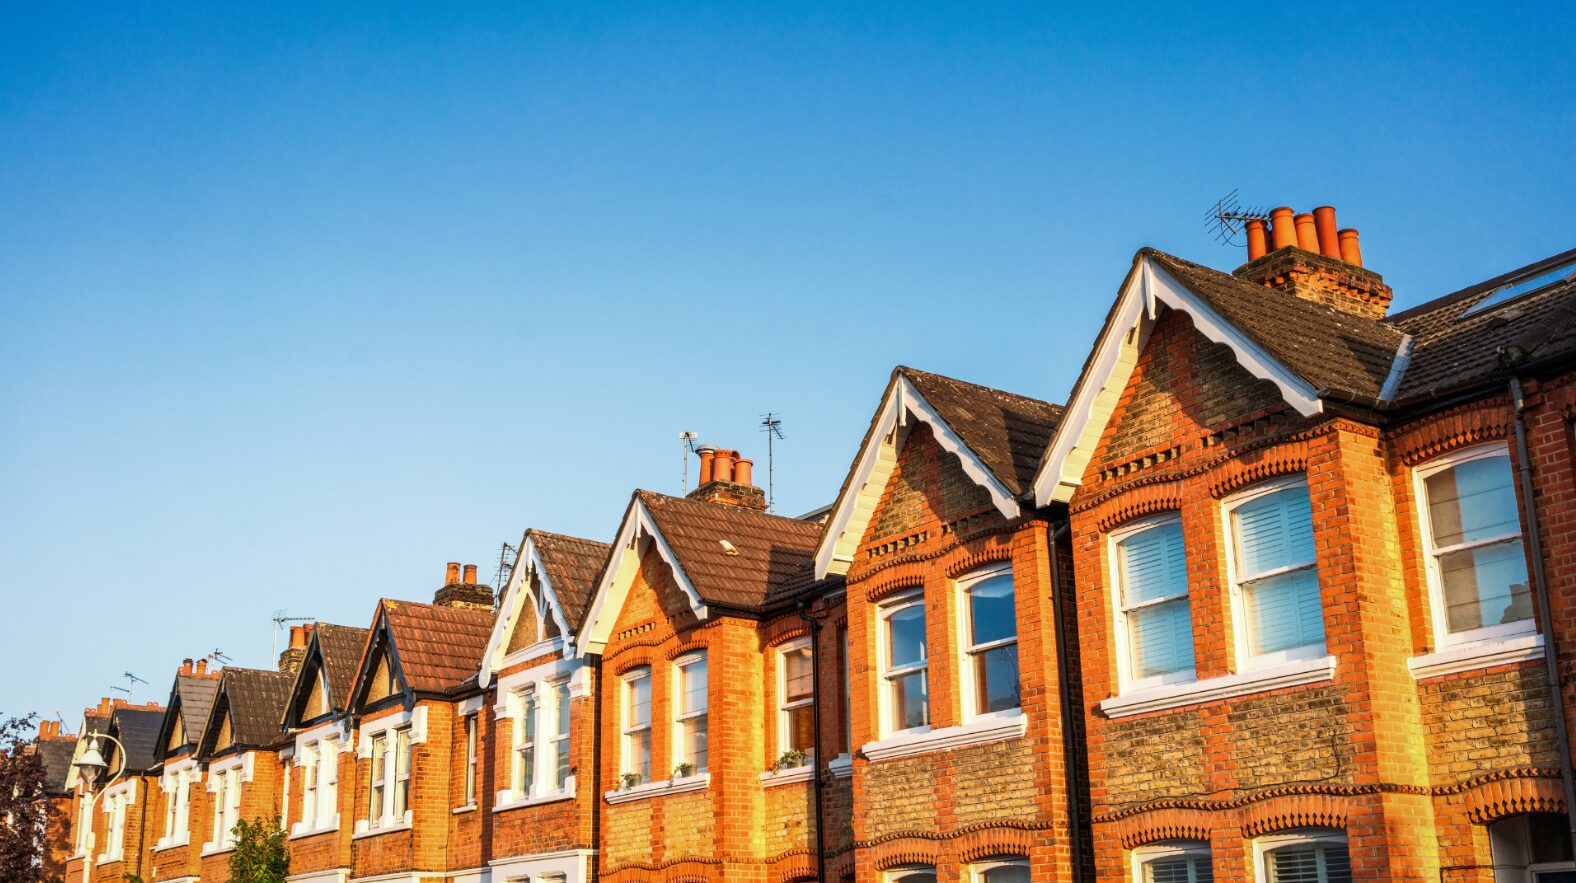 A row of terraced homes in the UK with blue skies in the background.